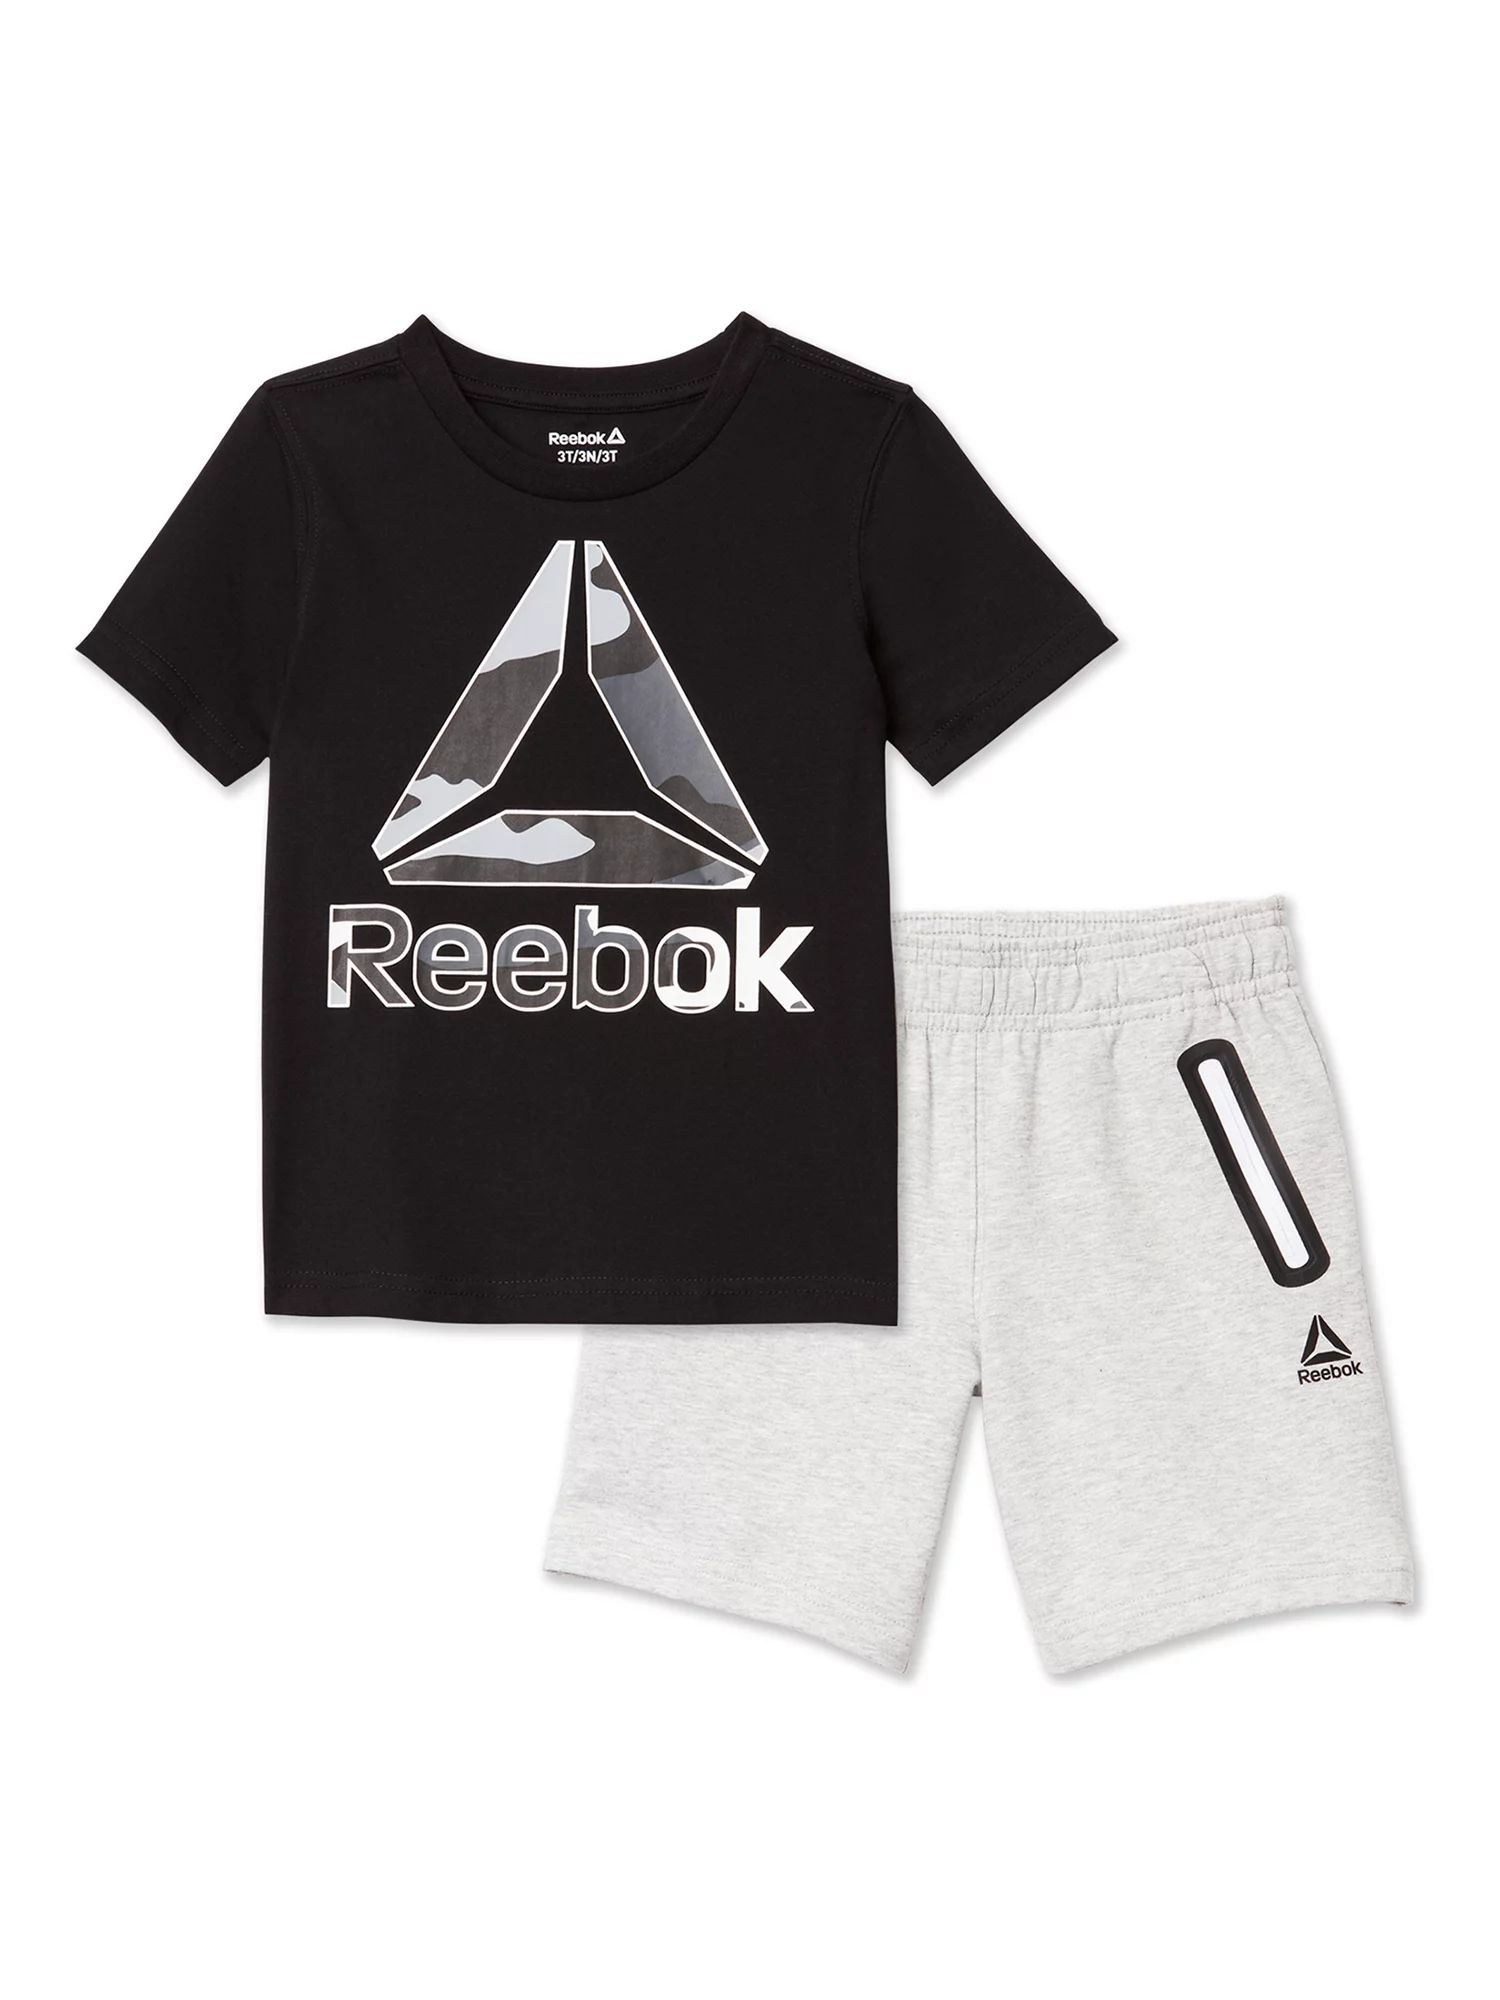 Reebok Baby and Toddler Boy Active Graphic T-Shirt and Short Outfit Set, 2-Piece, Sizes 12M-5T | Walmart (US)